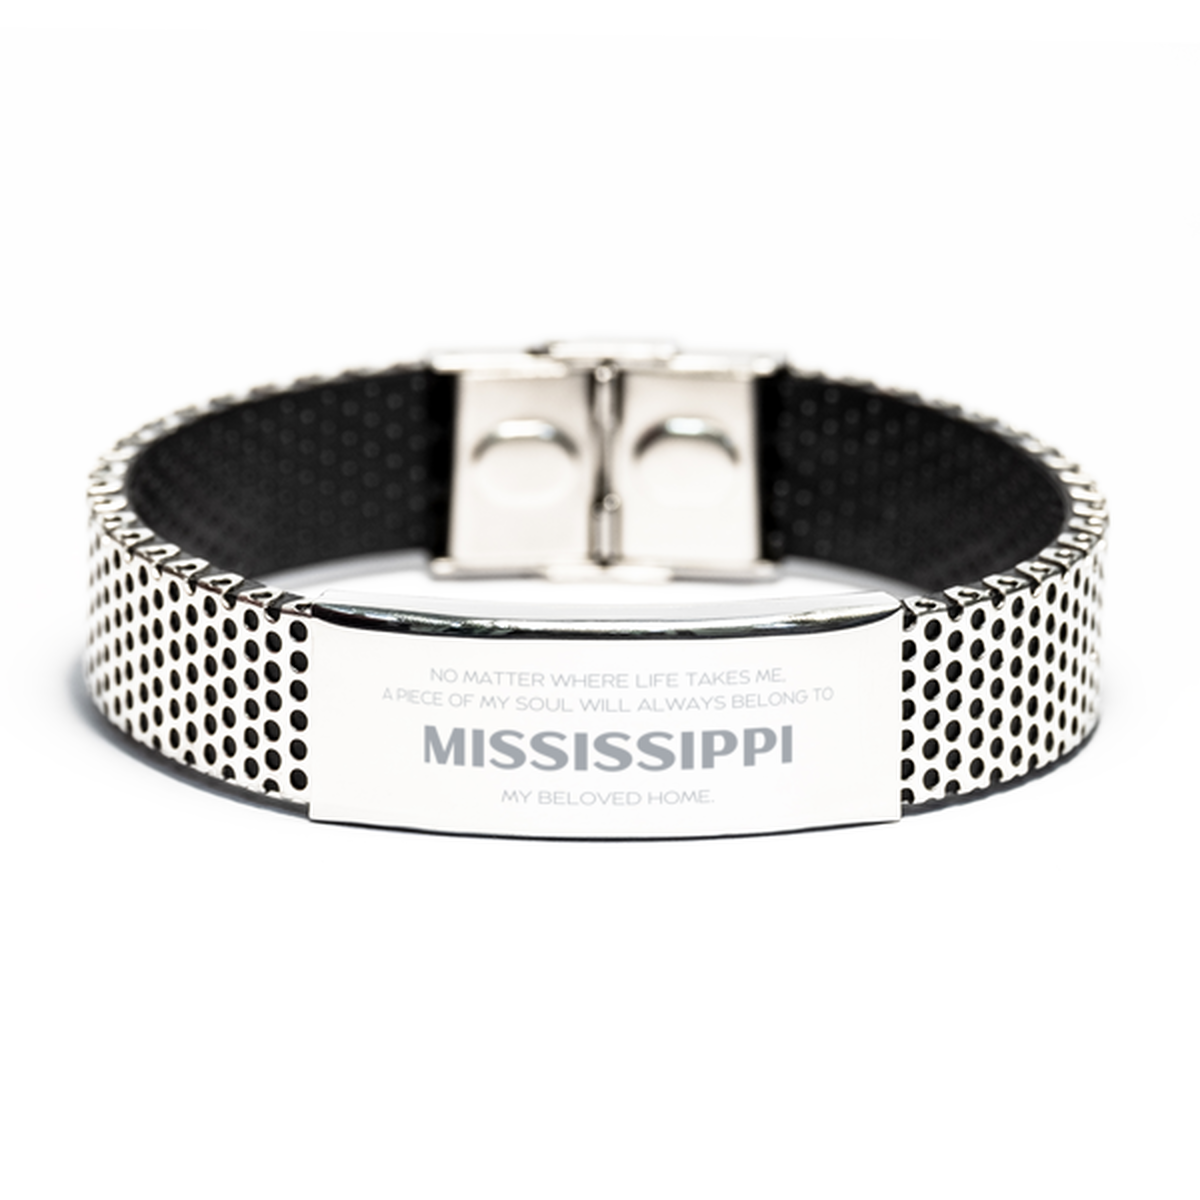 Love Mississippi State Gifts, My soul will always belong to Mississippi, Proud Stainless Steel Bracelet, Birthday Unique Gifts For Mississippi Men, Women, Friends